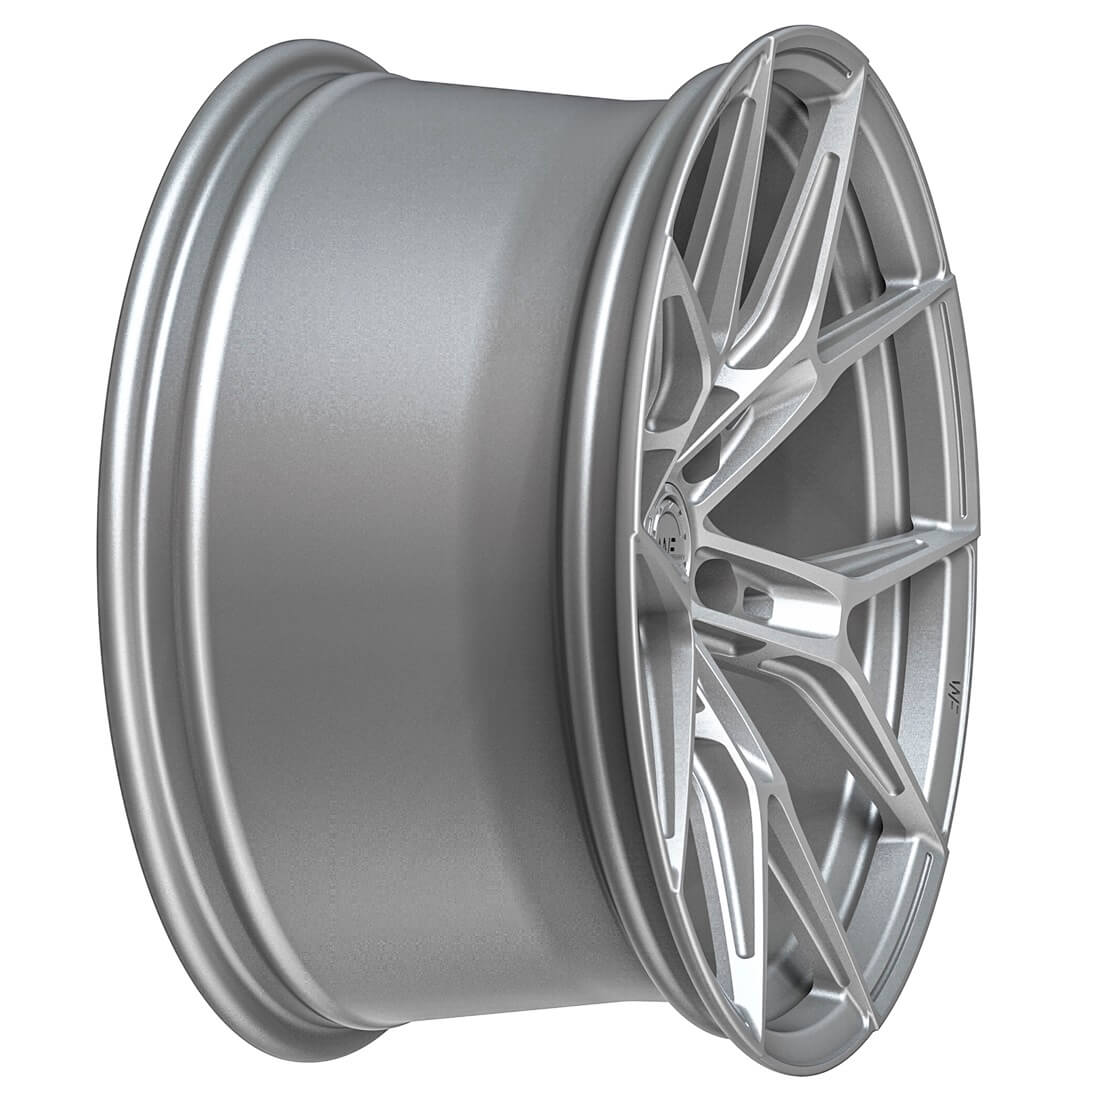 WF RACE.ONE | FORGED FROZEN SILVER 5X112 9x19 ET44